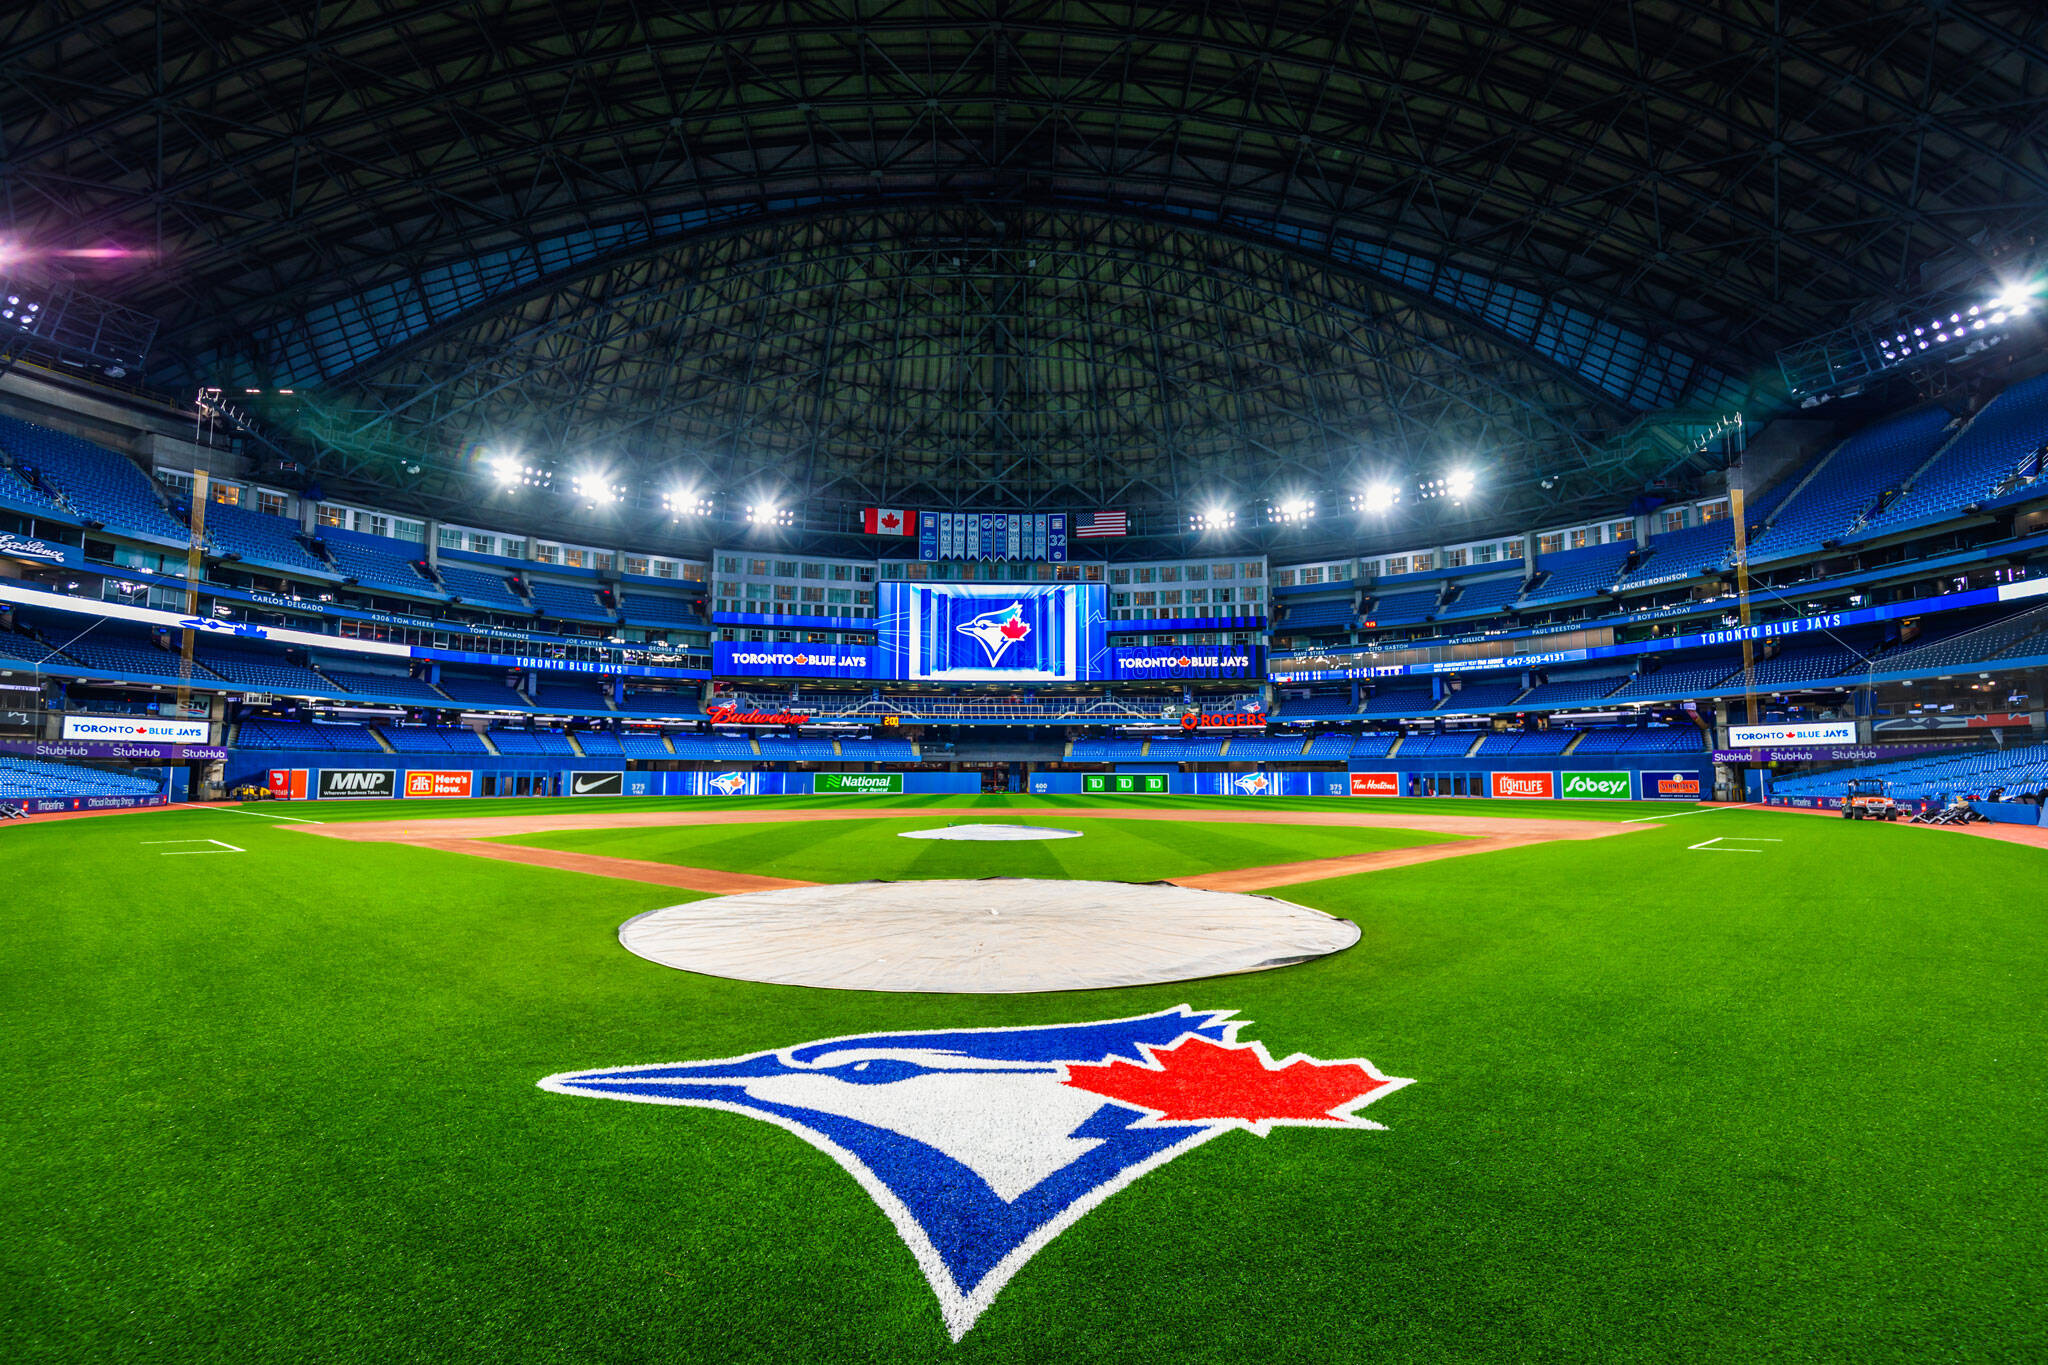 Here's what the new upgrades to Toronto's Rogers Centre look like